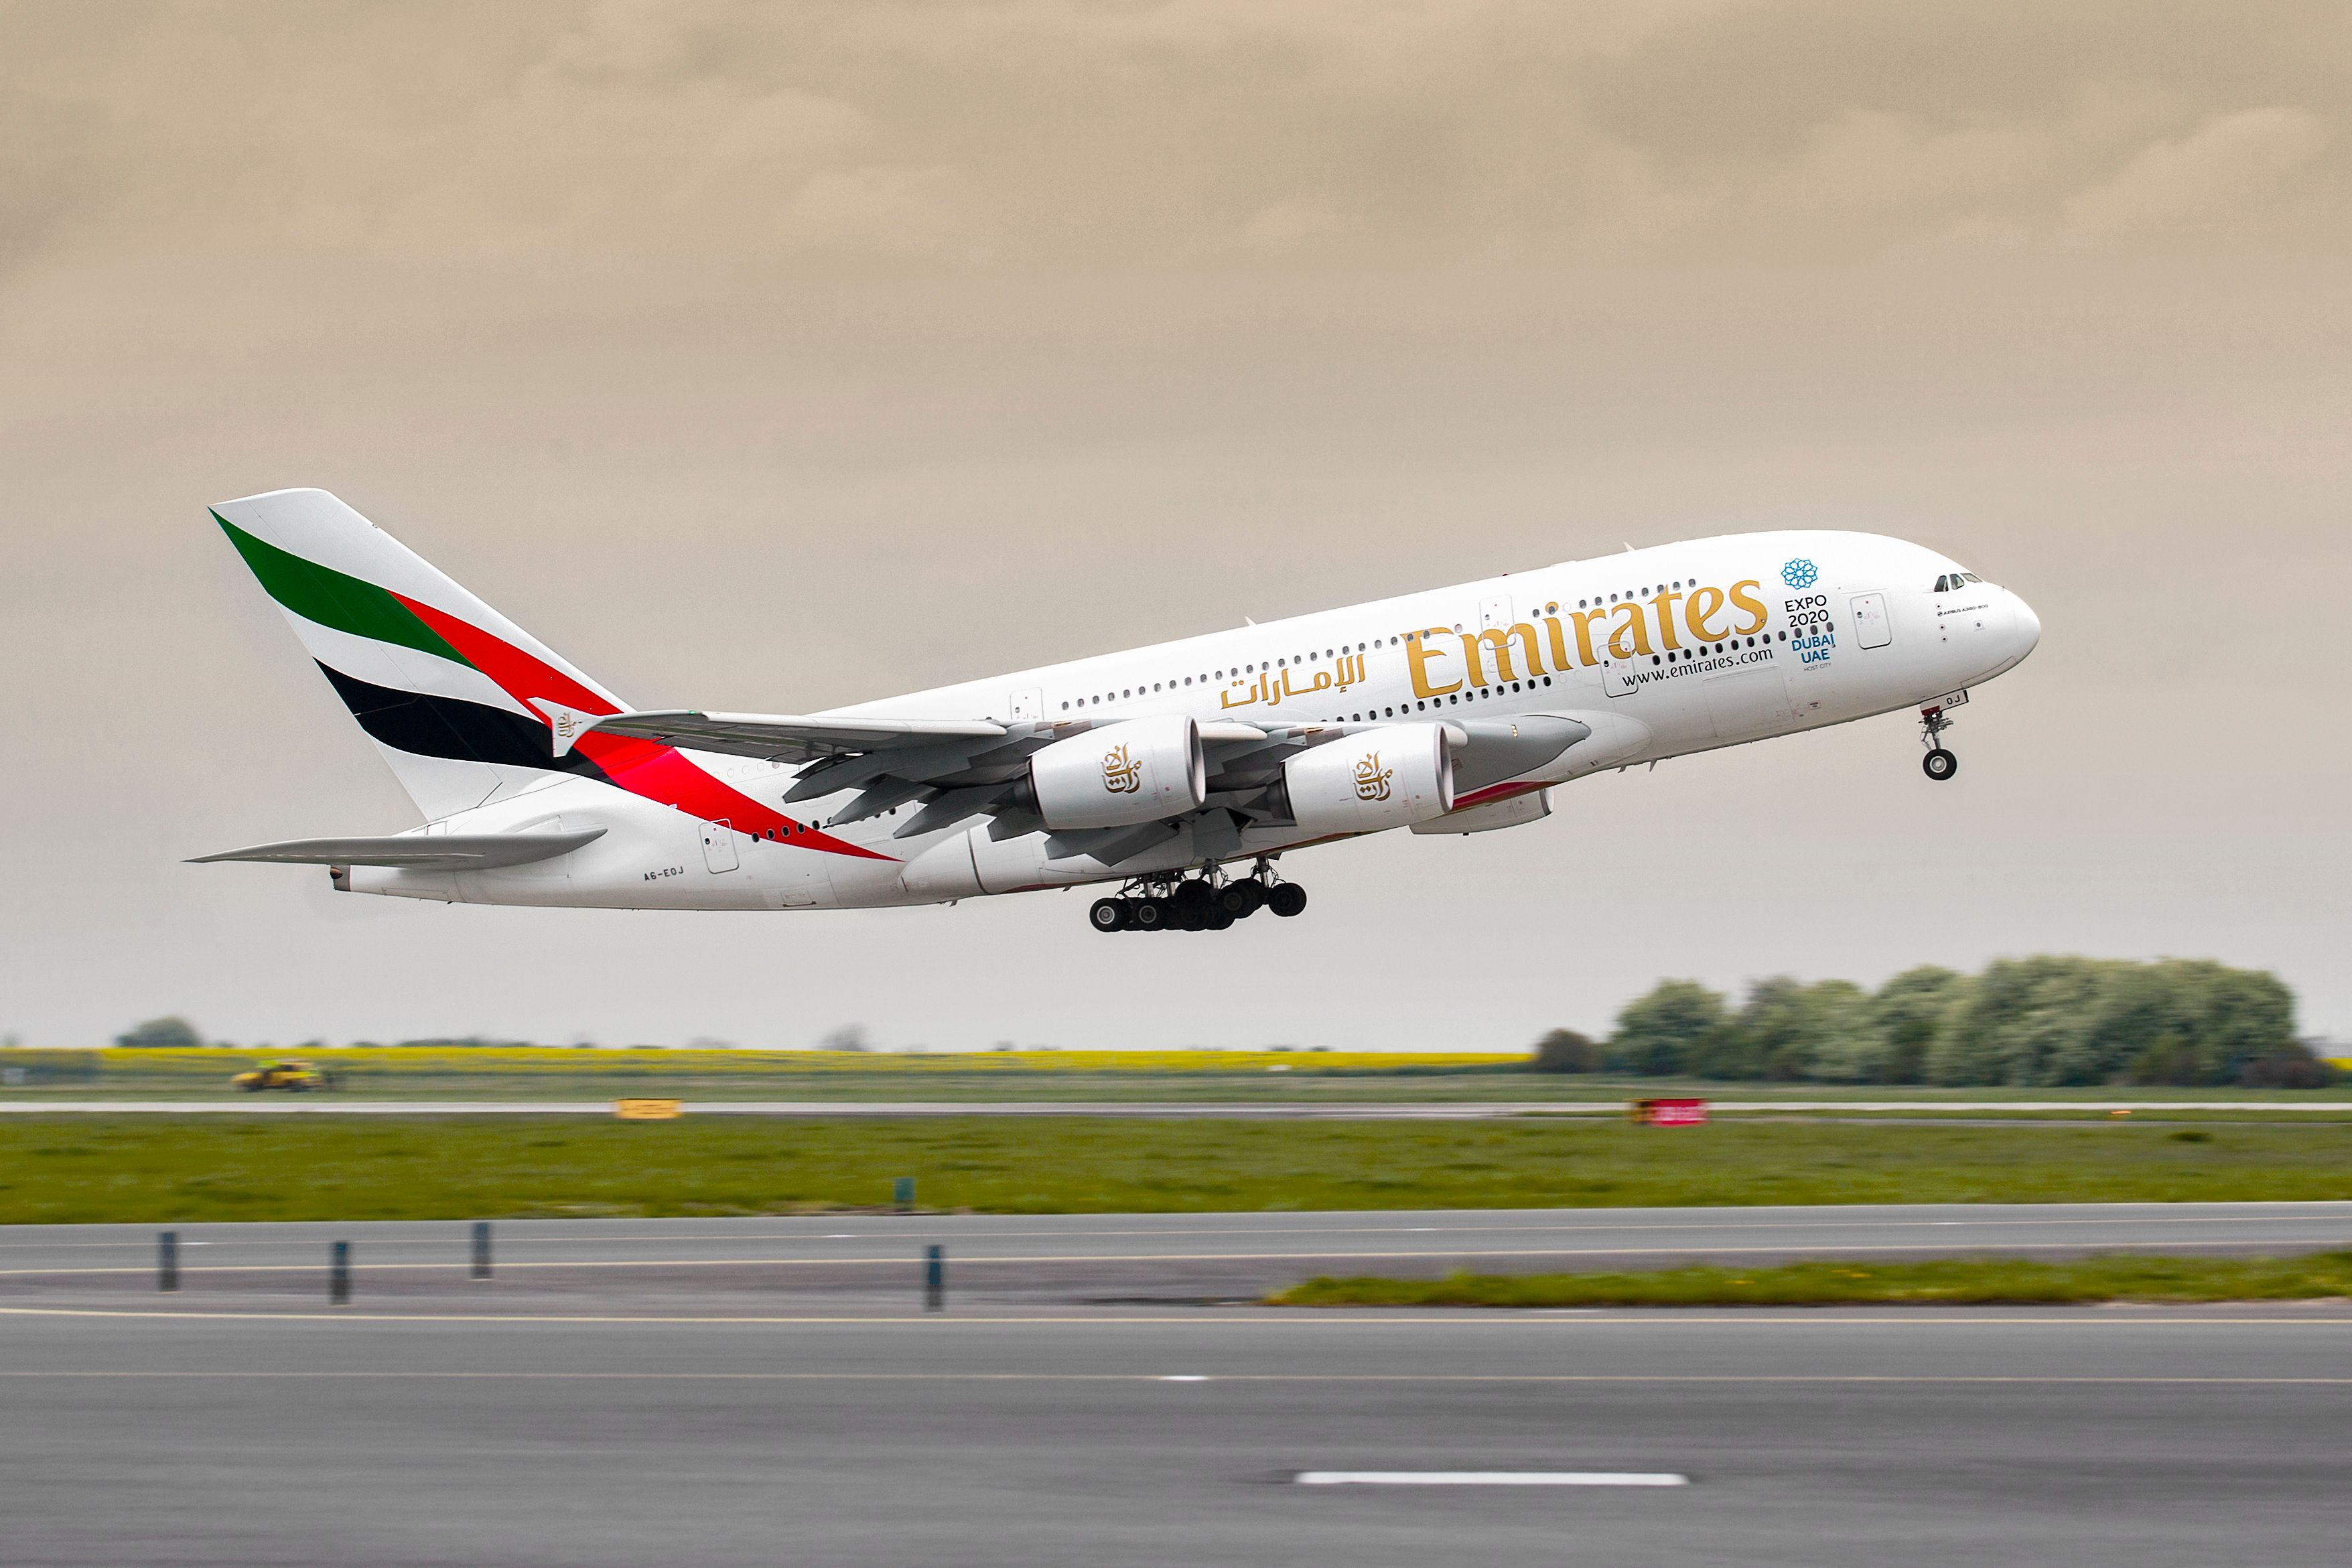 Emirates Airbus A380 taking off